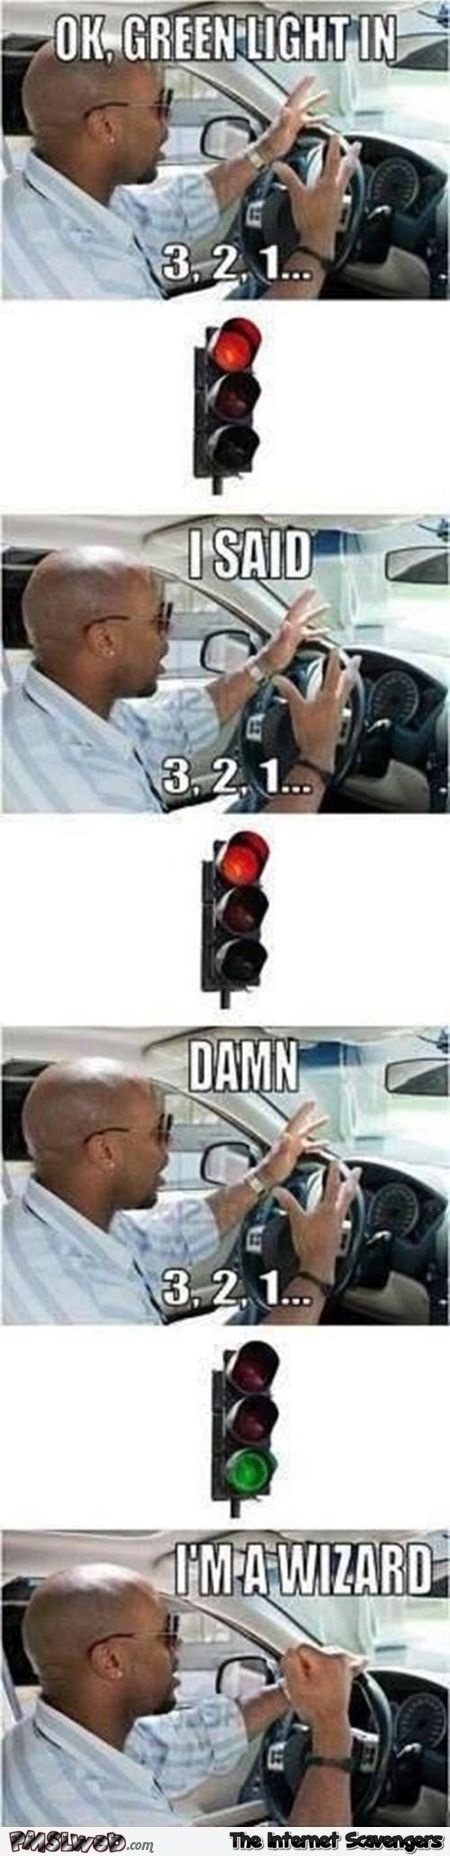 When you’re waiting for the traffic light to change funny meme @PMSLweb.com